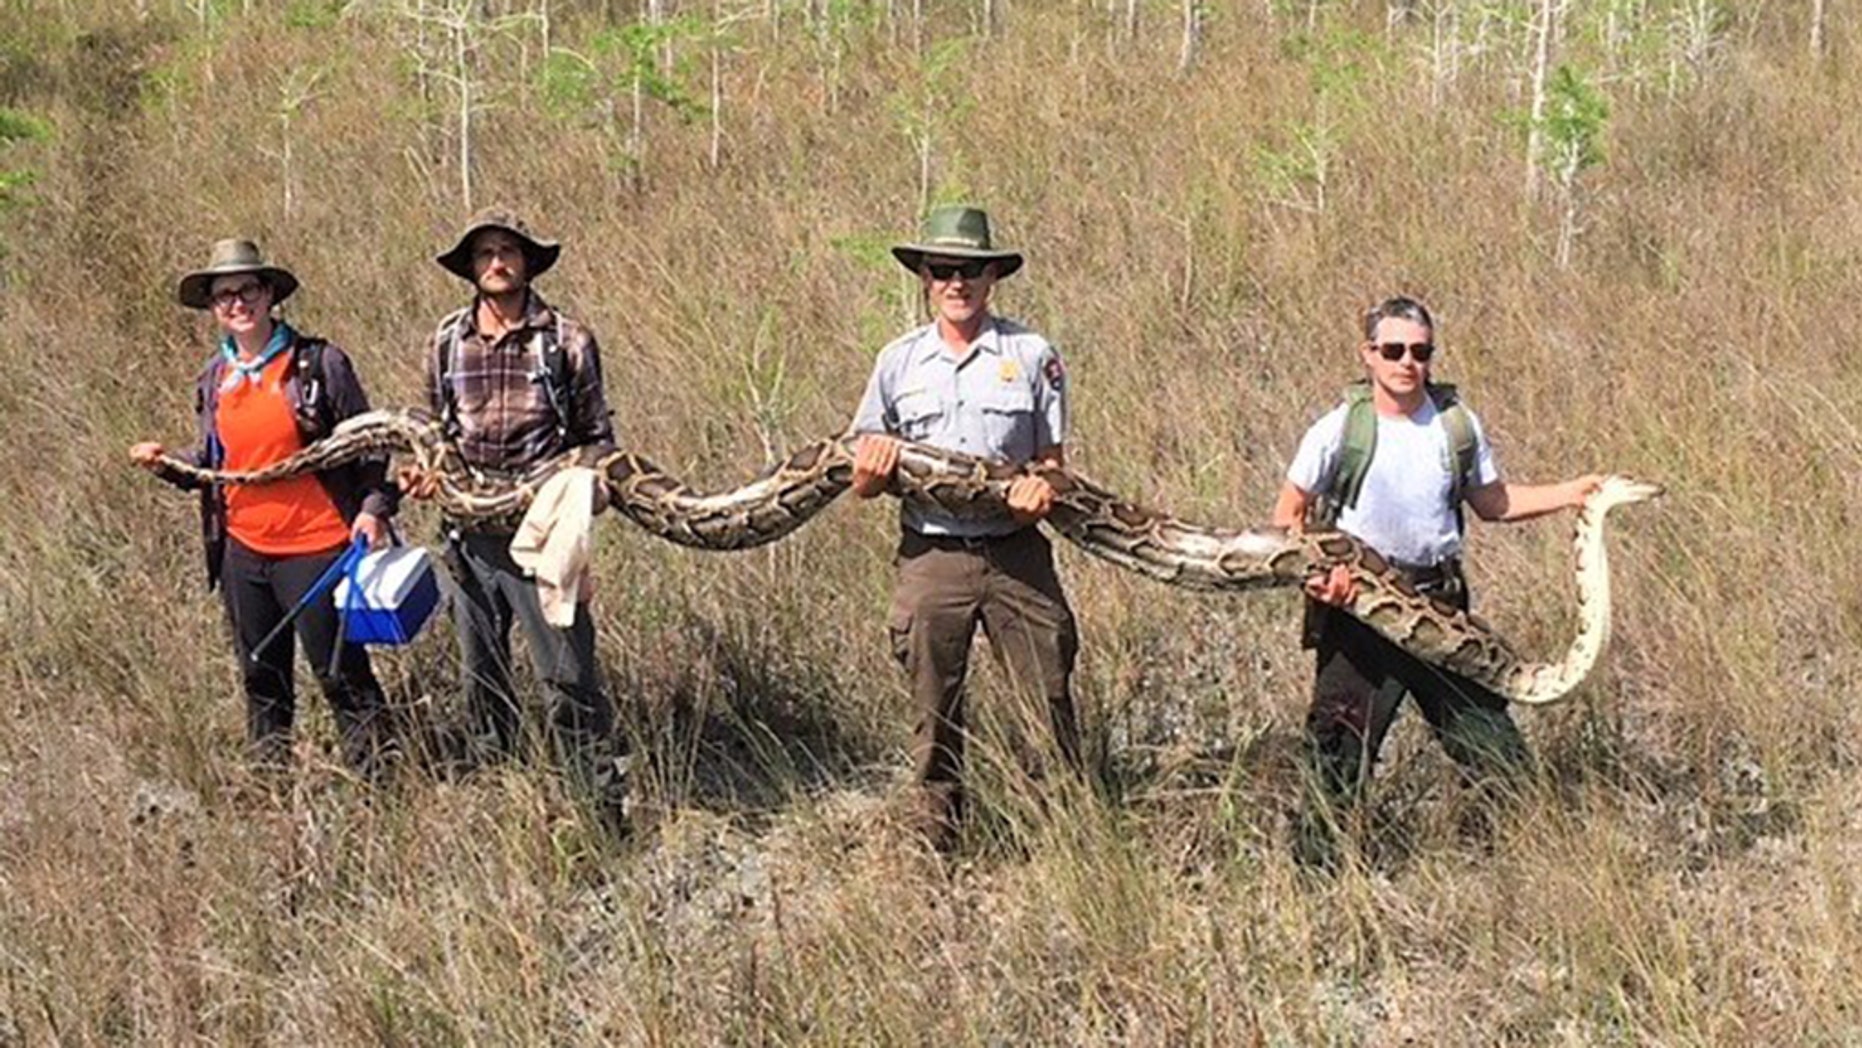 The record setting python isÂ held by a team of four hunters who captured the largest female snake at Big Cypress National Preserve.